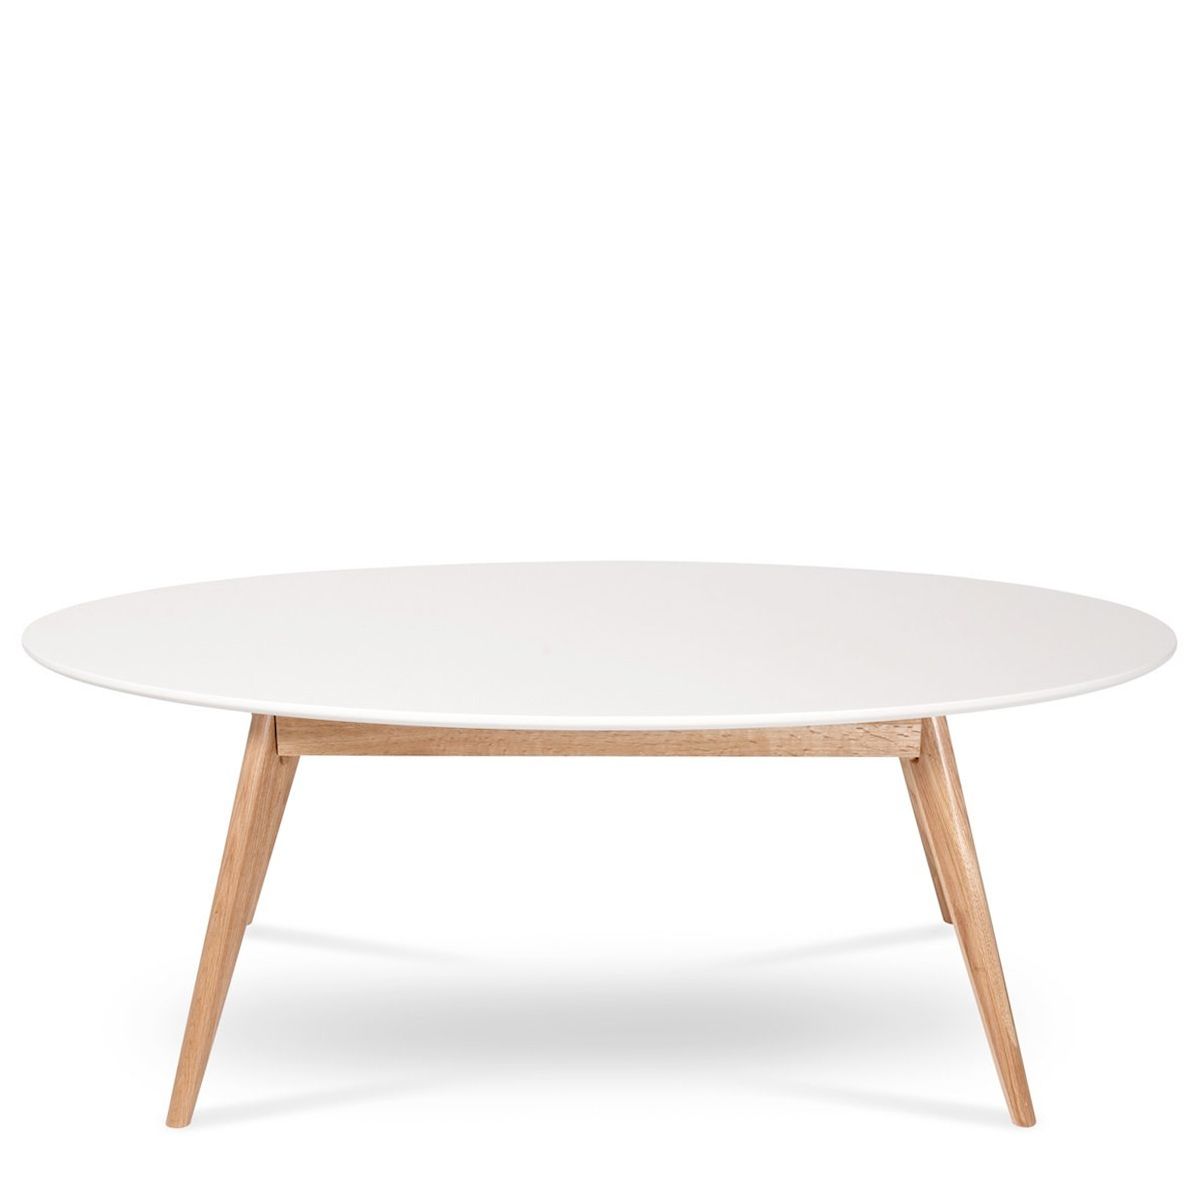 Table basse ovale cocktail scandinave